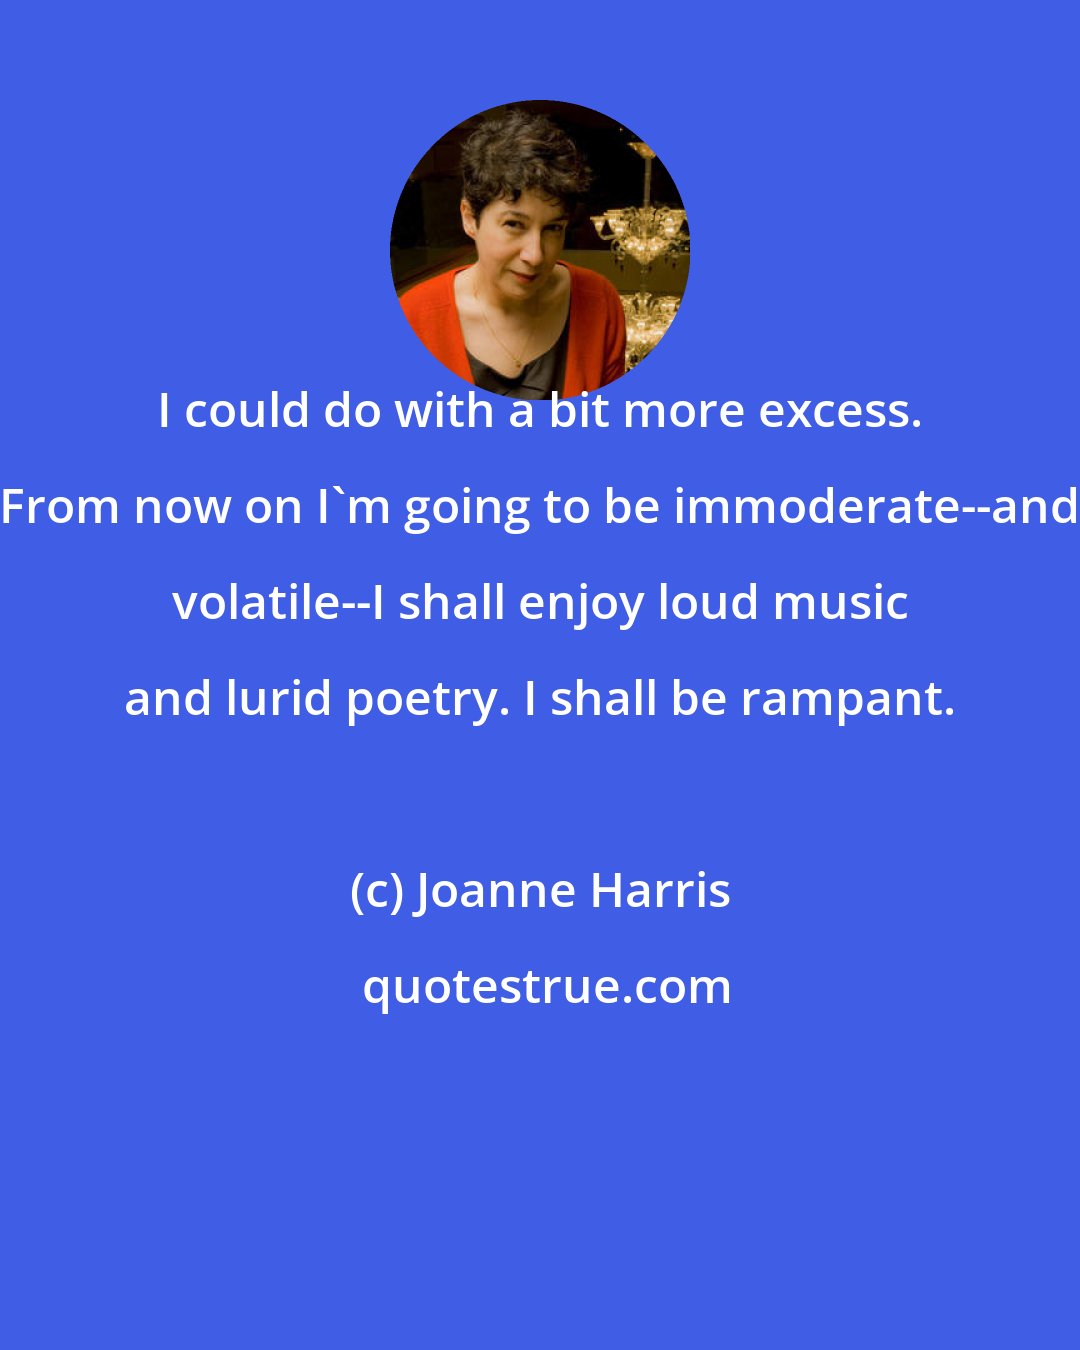 Joanne Harris: I could do with a bit more excess. From now on I'm going to be immoderate--and volatile--I shall enjoy loud music and lurid poetry. I shall be rampant.